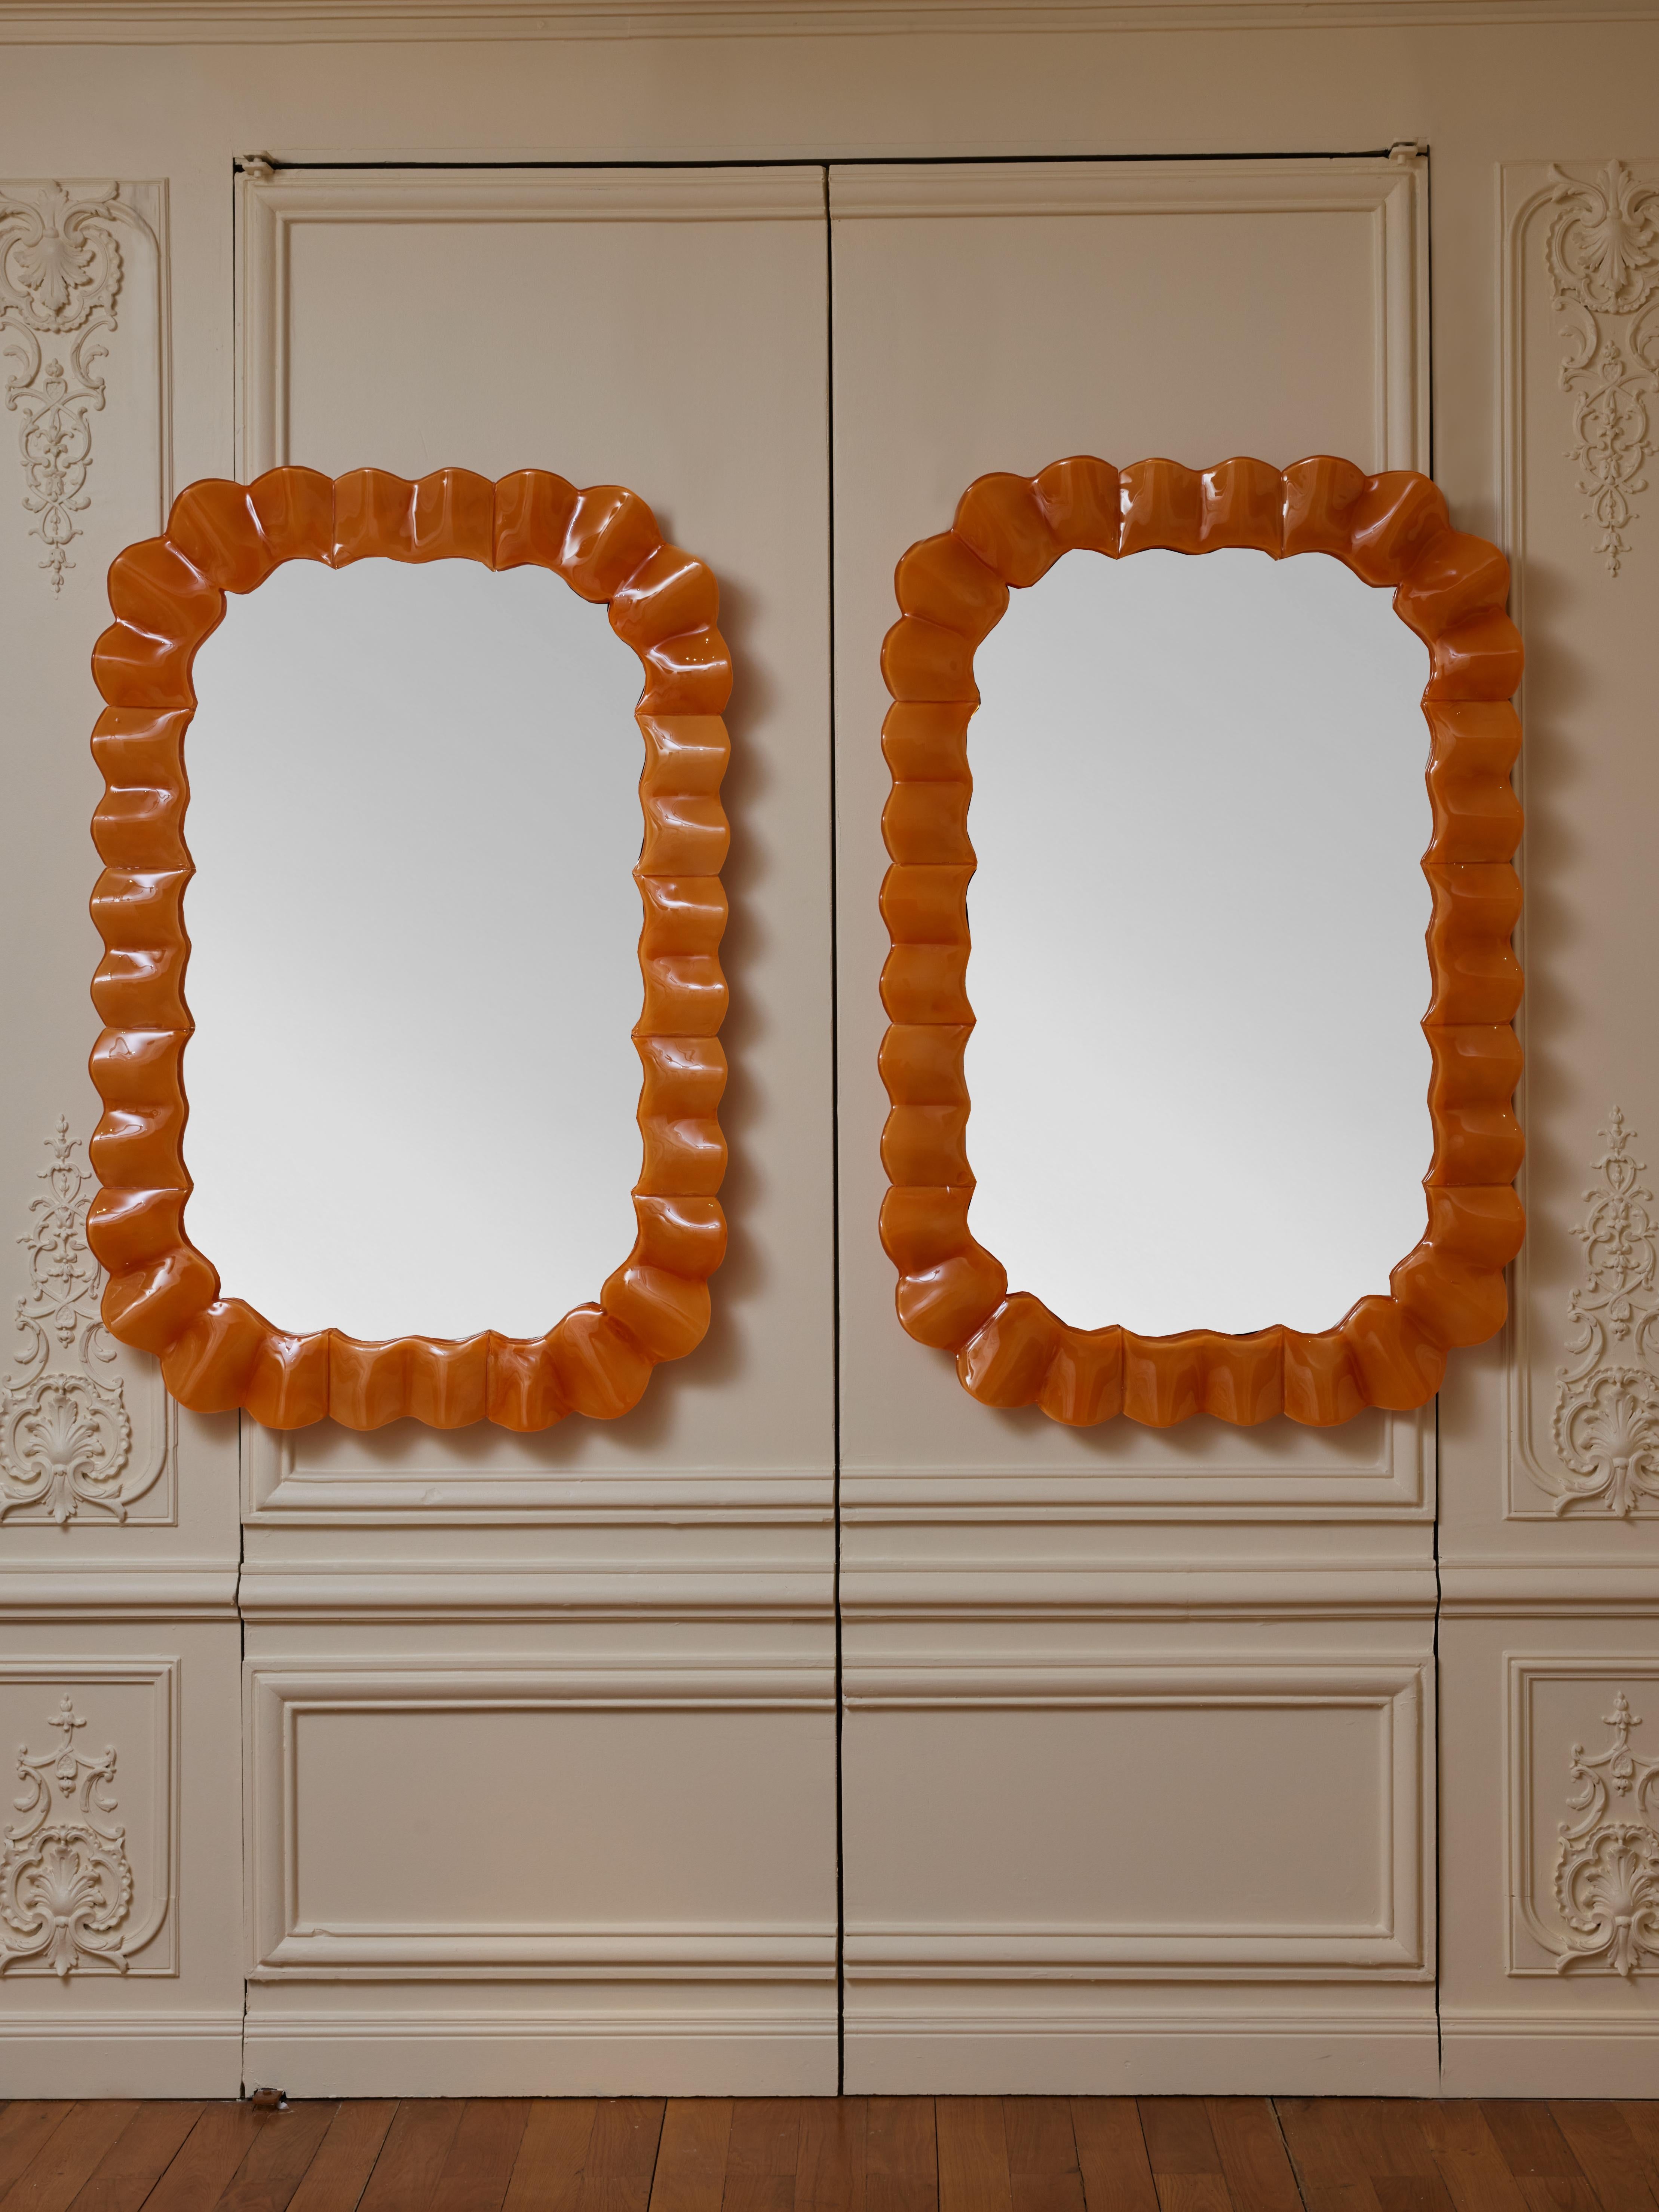 Pair of mirrors with frame in orange Murano glass.
Creation by Studio Glustin.
Italy, 2023.